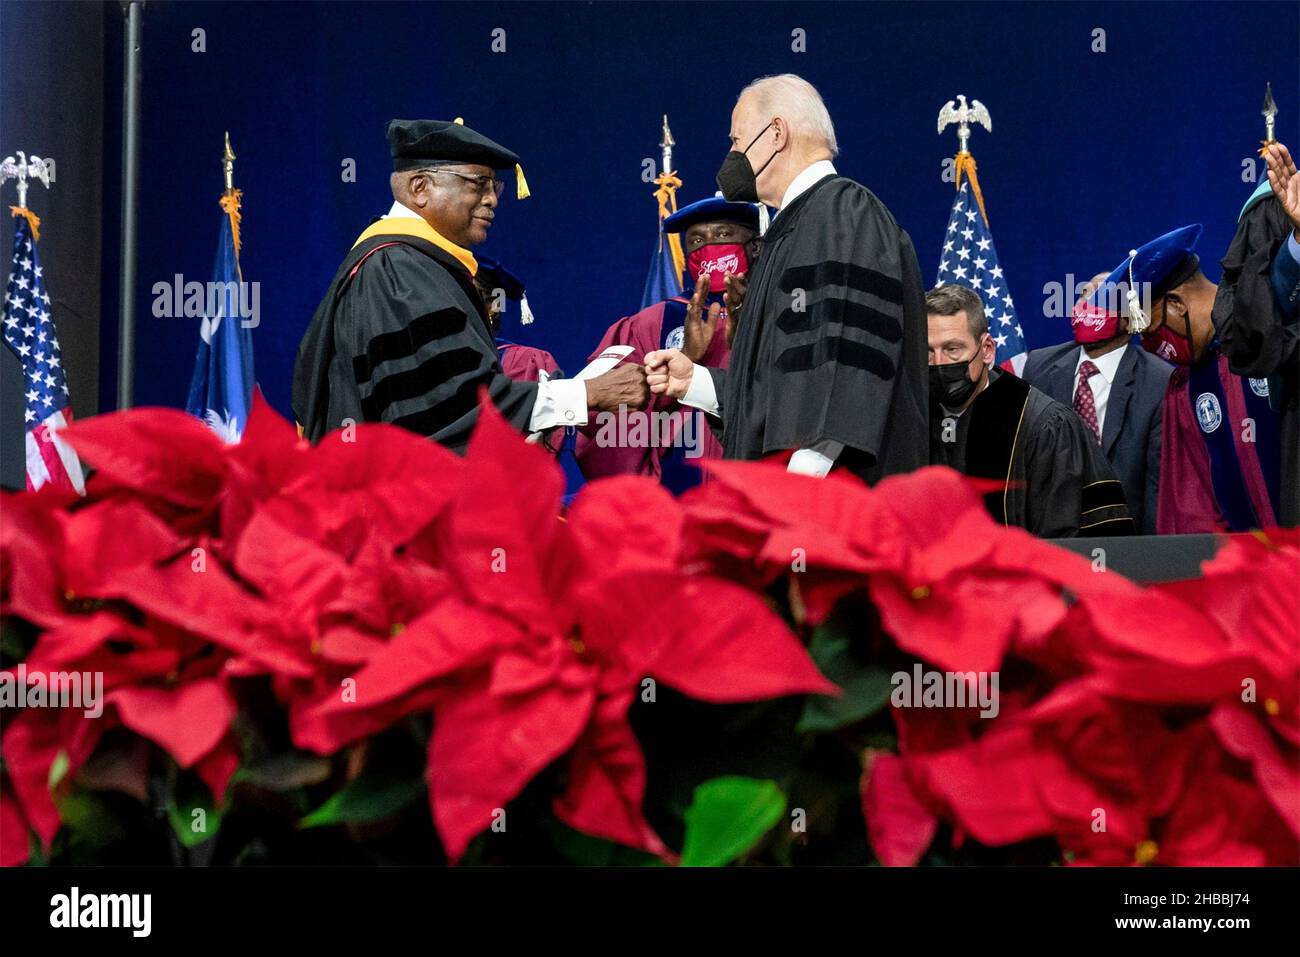 Orangeburg, USA. 17th Dec, 2021. Orangeburg, USA. 17 December, 2021. U.S President Joe Biden bumps fists with Rep. Jim Clyburn during the graduation ceremony at South Carolina State University December 17, 2021 in Orangeburg, South Carolina. Clyburn graduated from the university sixty years ago, but never had the chance to walk in the commencement ceremony. Credit: Erin Scott/White House Photo/Alamy Live News Stock Photo